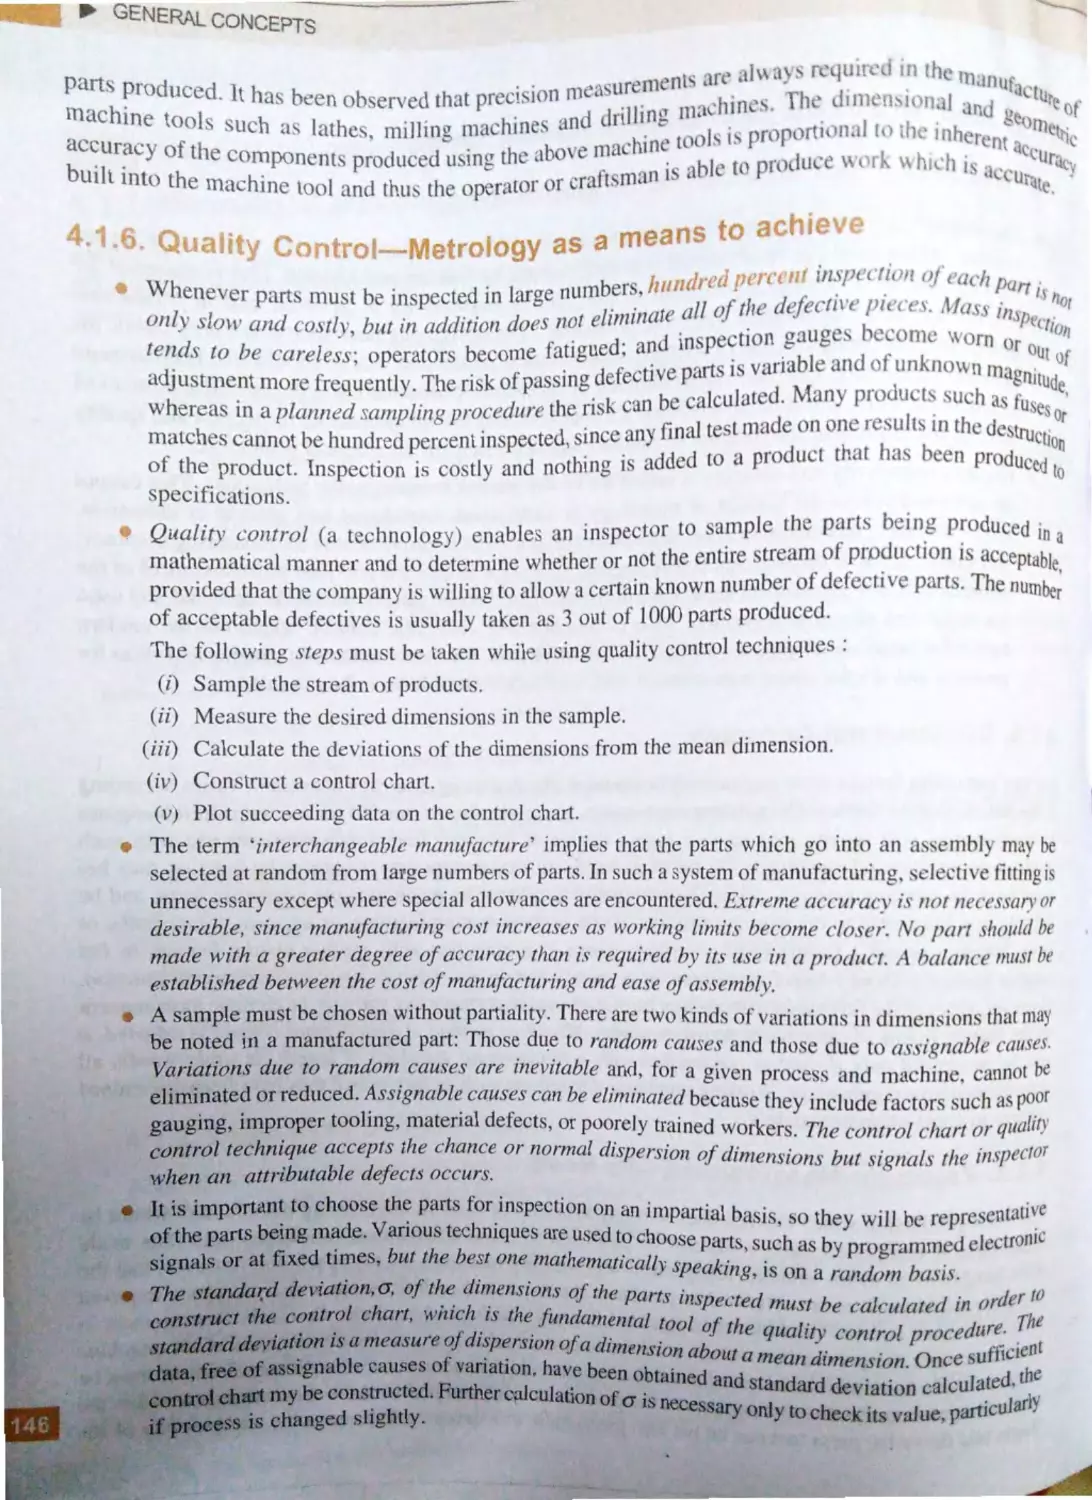 4.1.6. Quality Control - Metrology as a means to Achieve